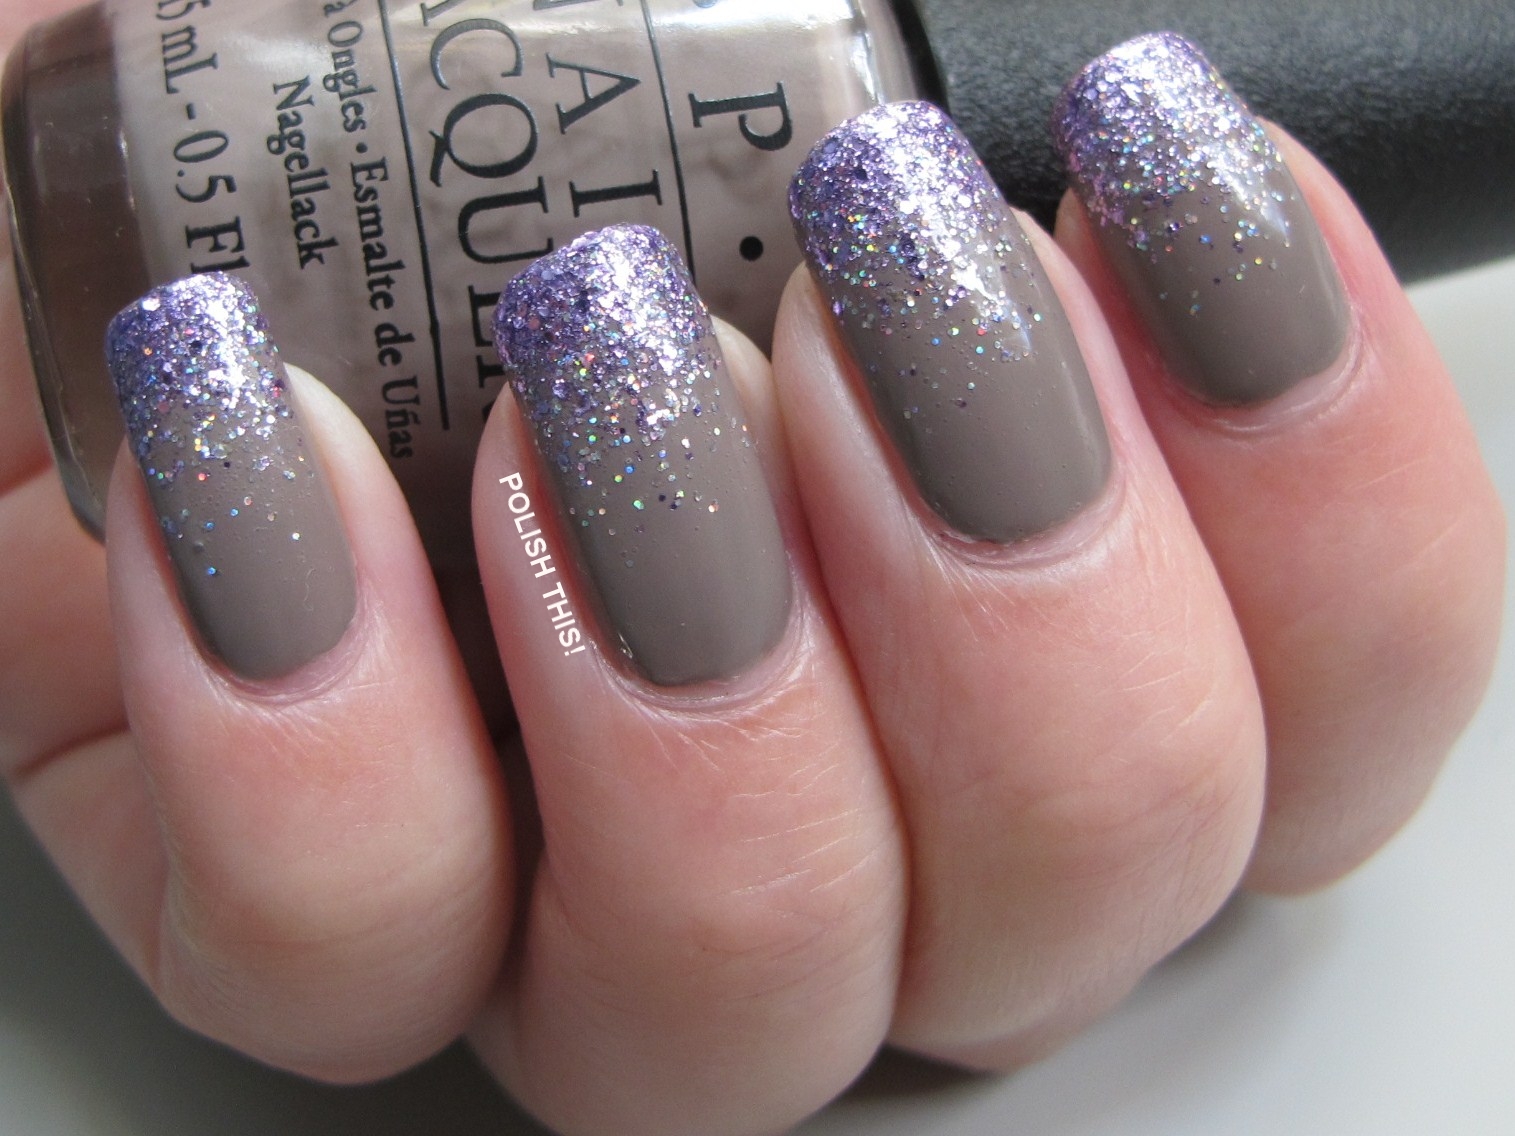 8. OPI Nail Lacquer in "Berlin There Done That" - wide 10